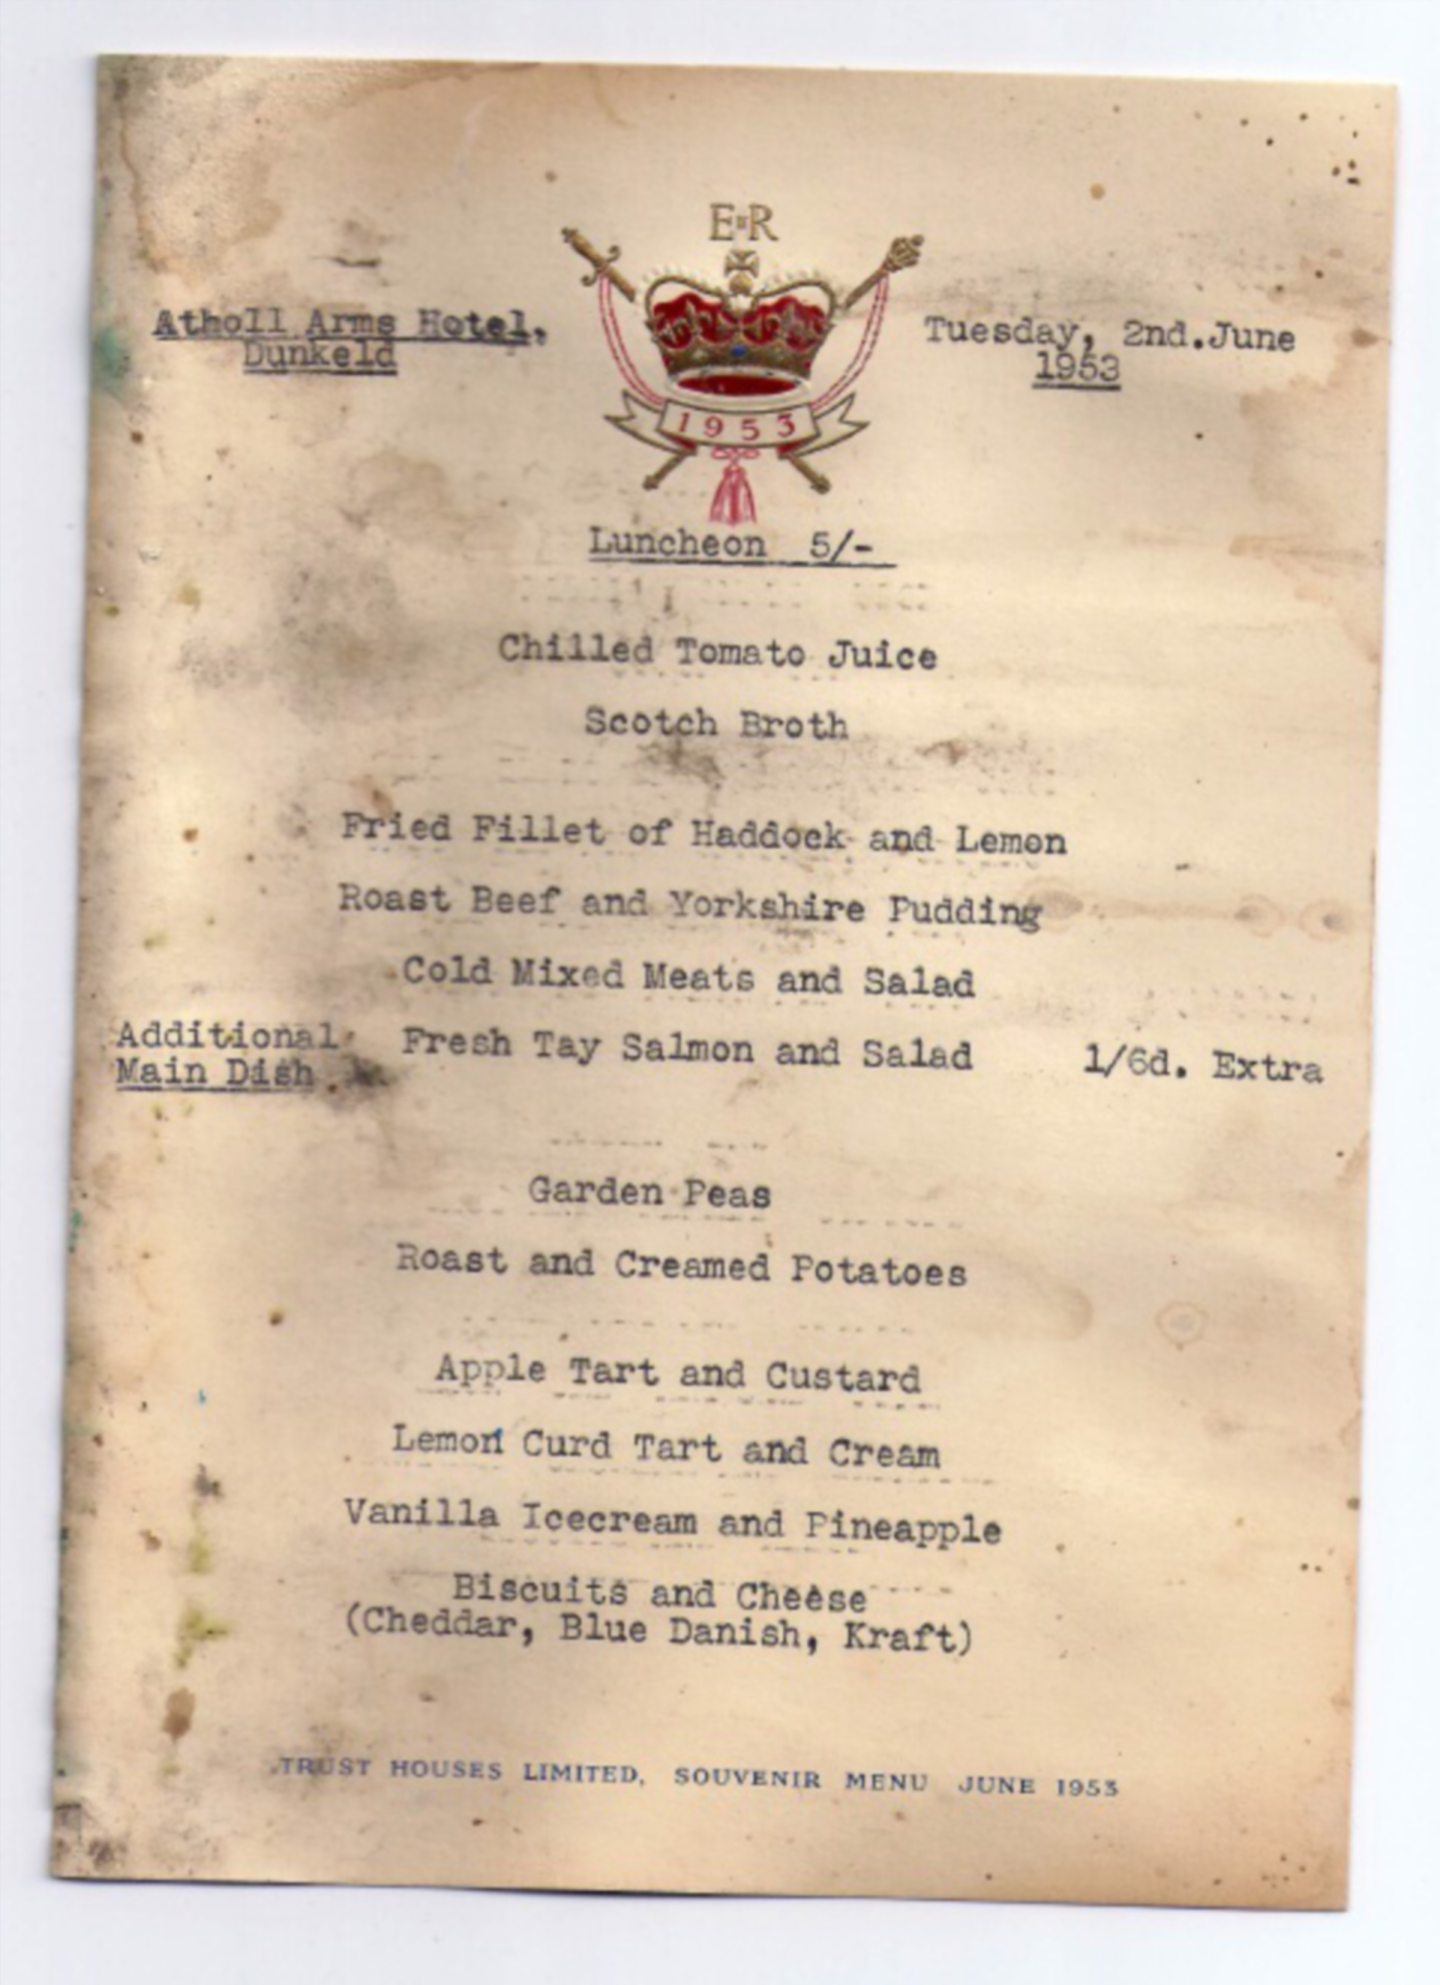 The Atholl Arms Hotel in Dunkeld was offering a three-course lunch for five shillings to celebrate. Image: Supplied.